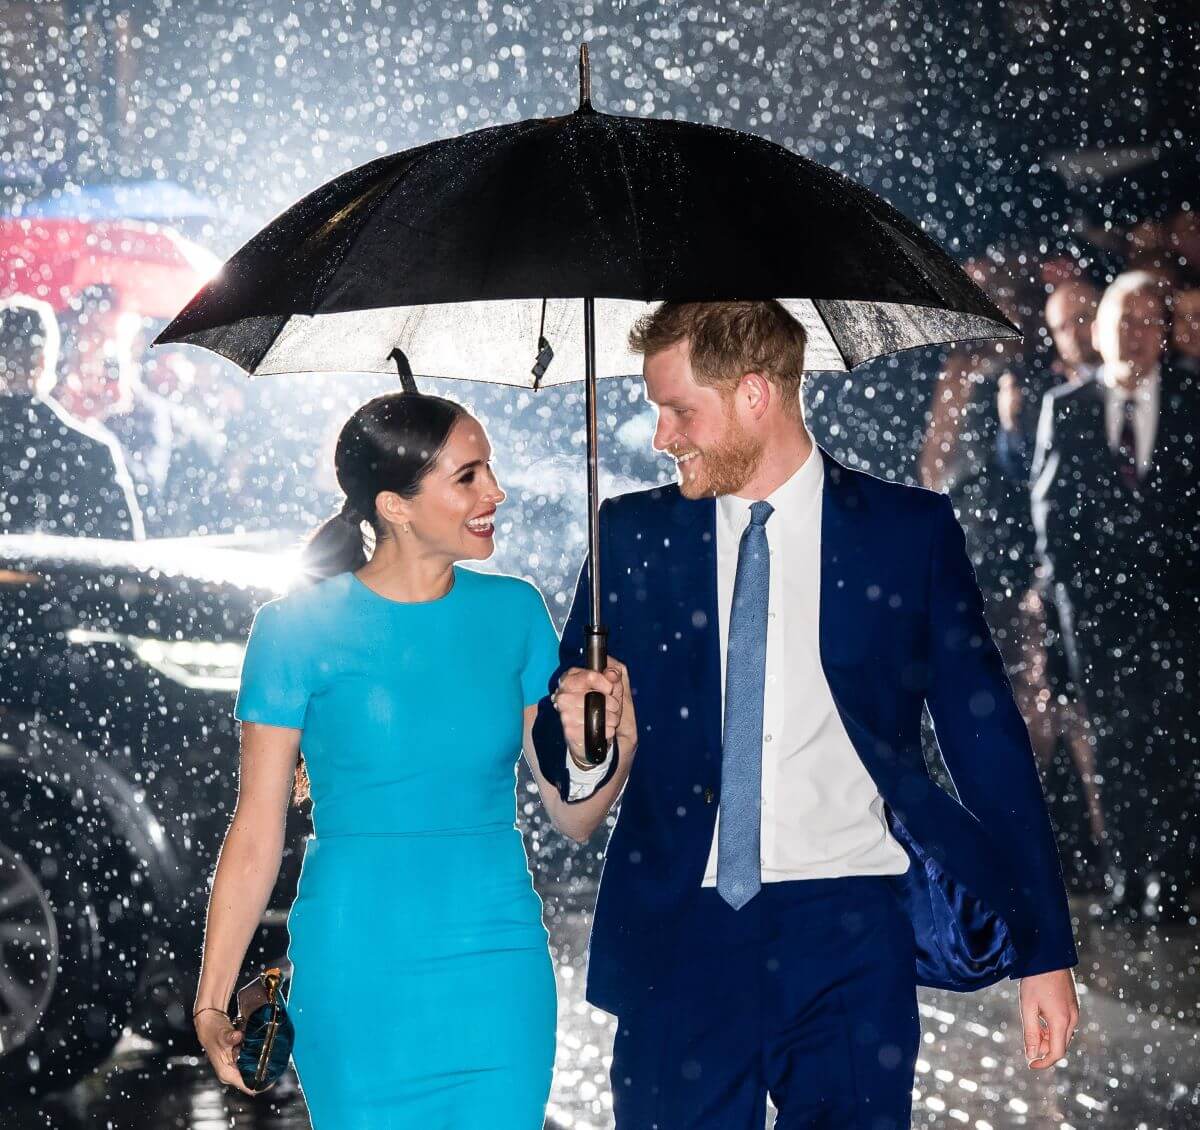 Meghan Markle and Prince Harry smiling under umbrella as they arrive at The Endeavour Fund Awards in London